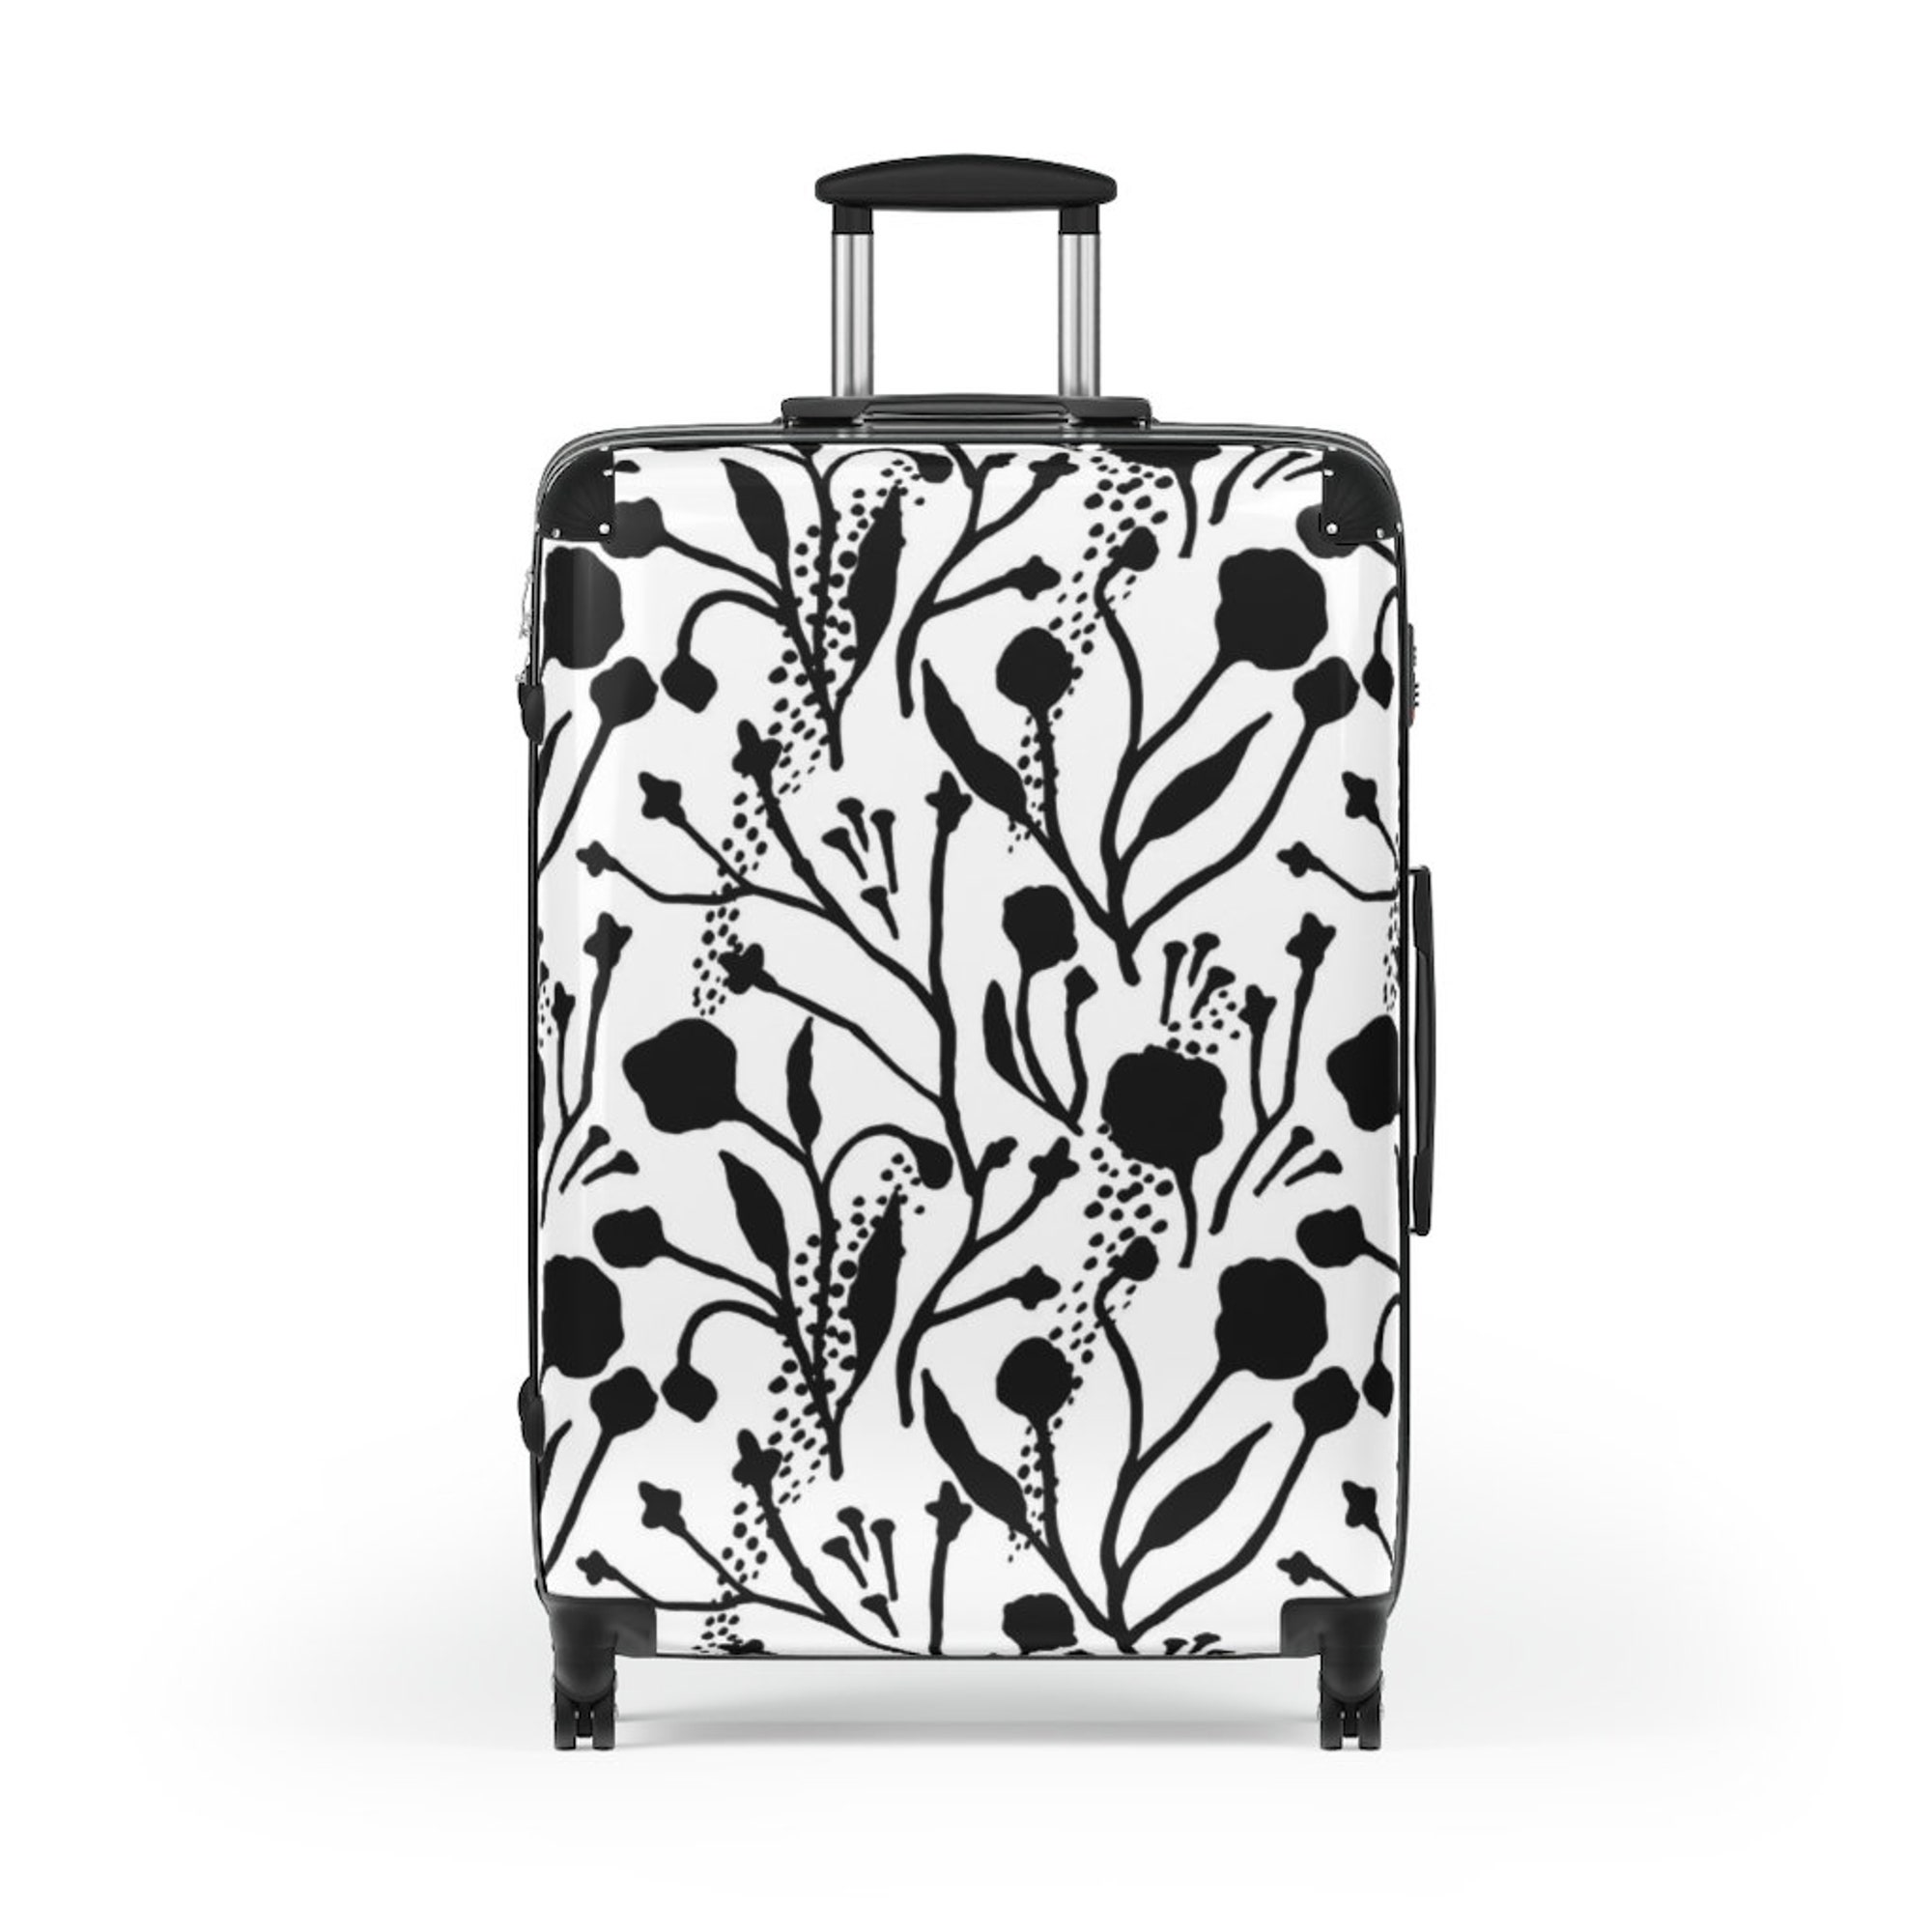 Discover The Ansley Suitcase